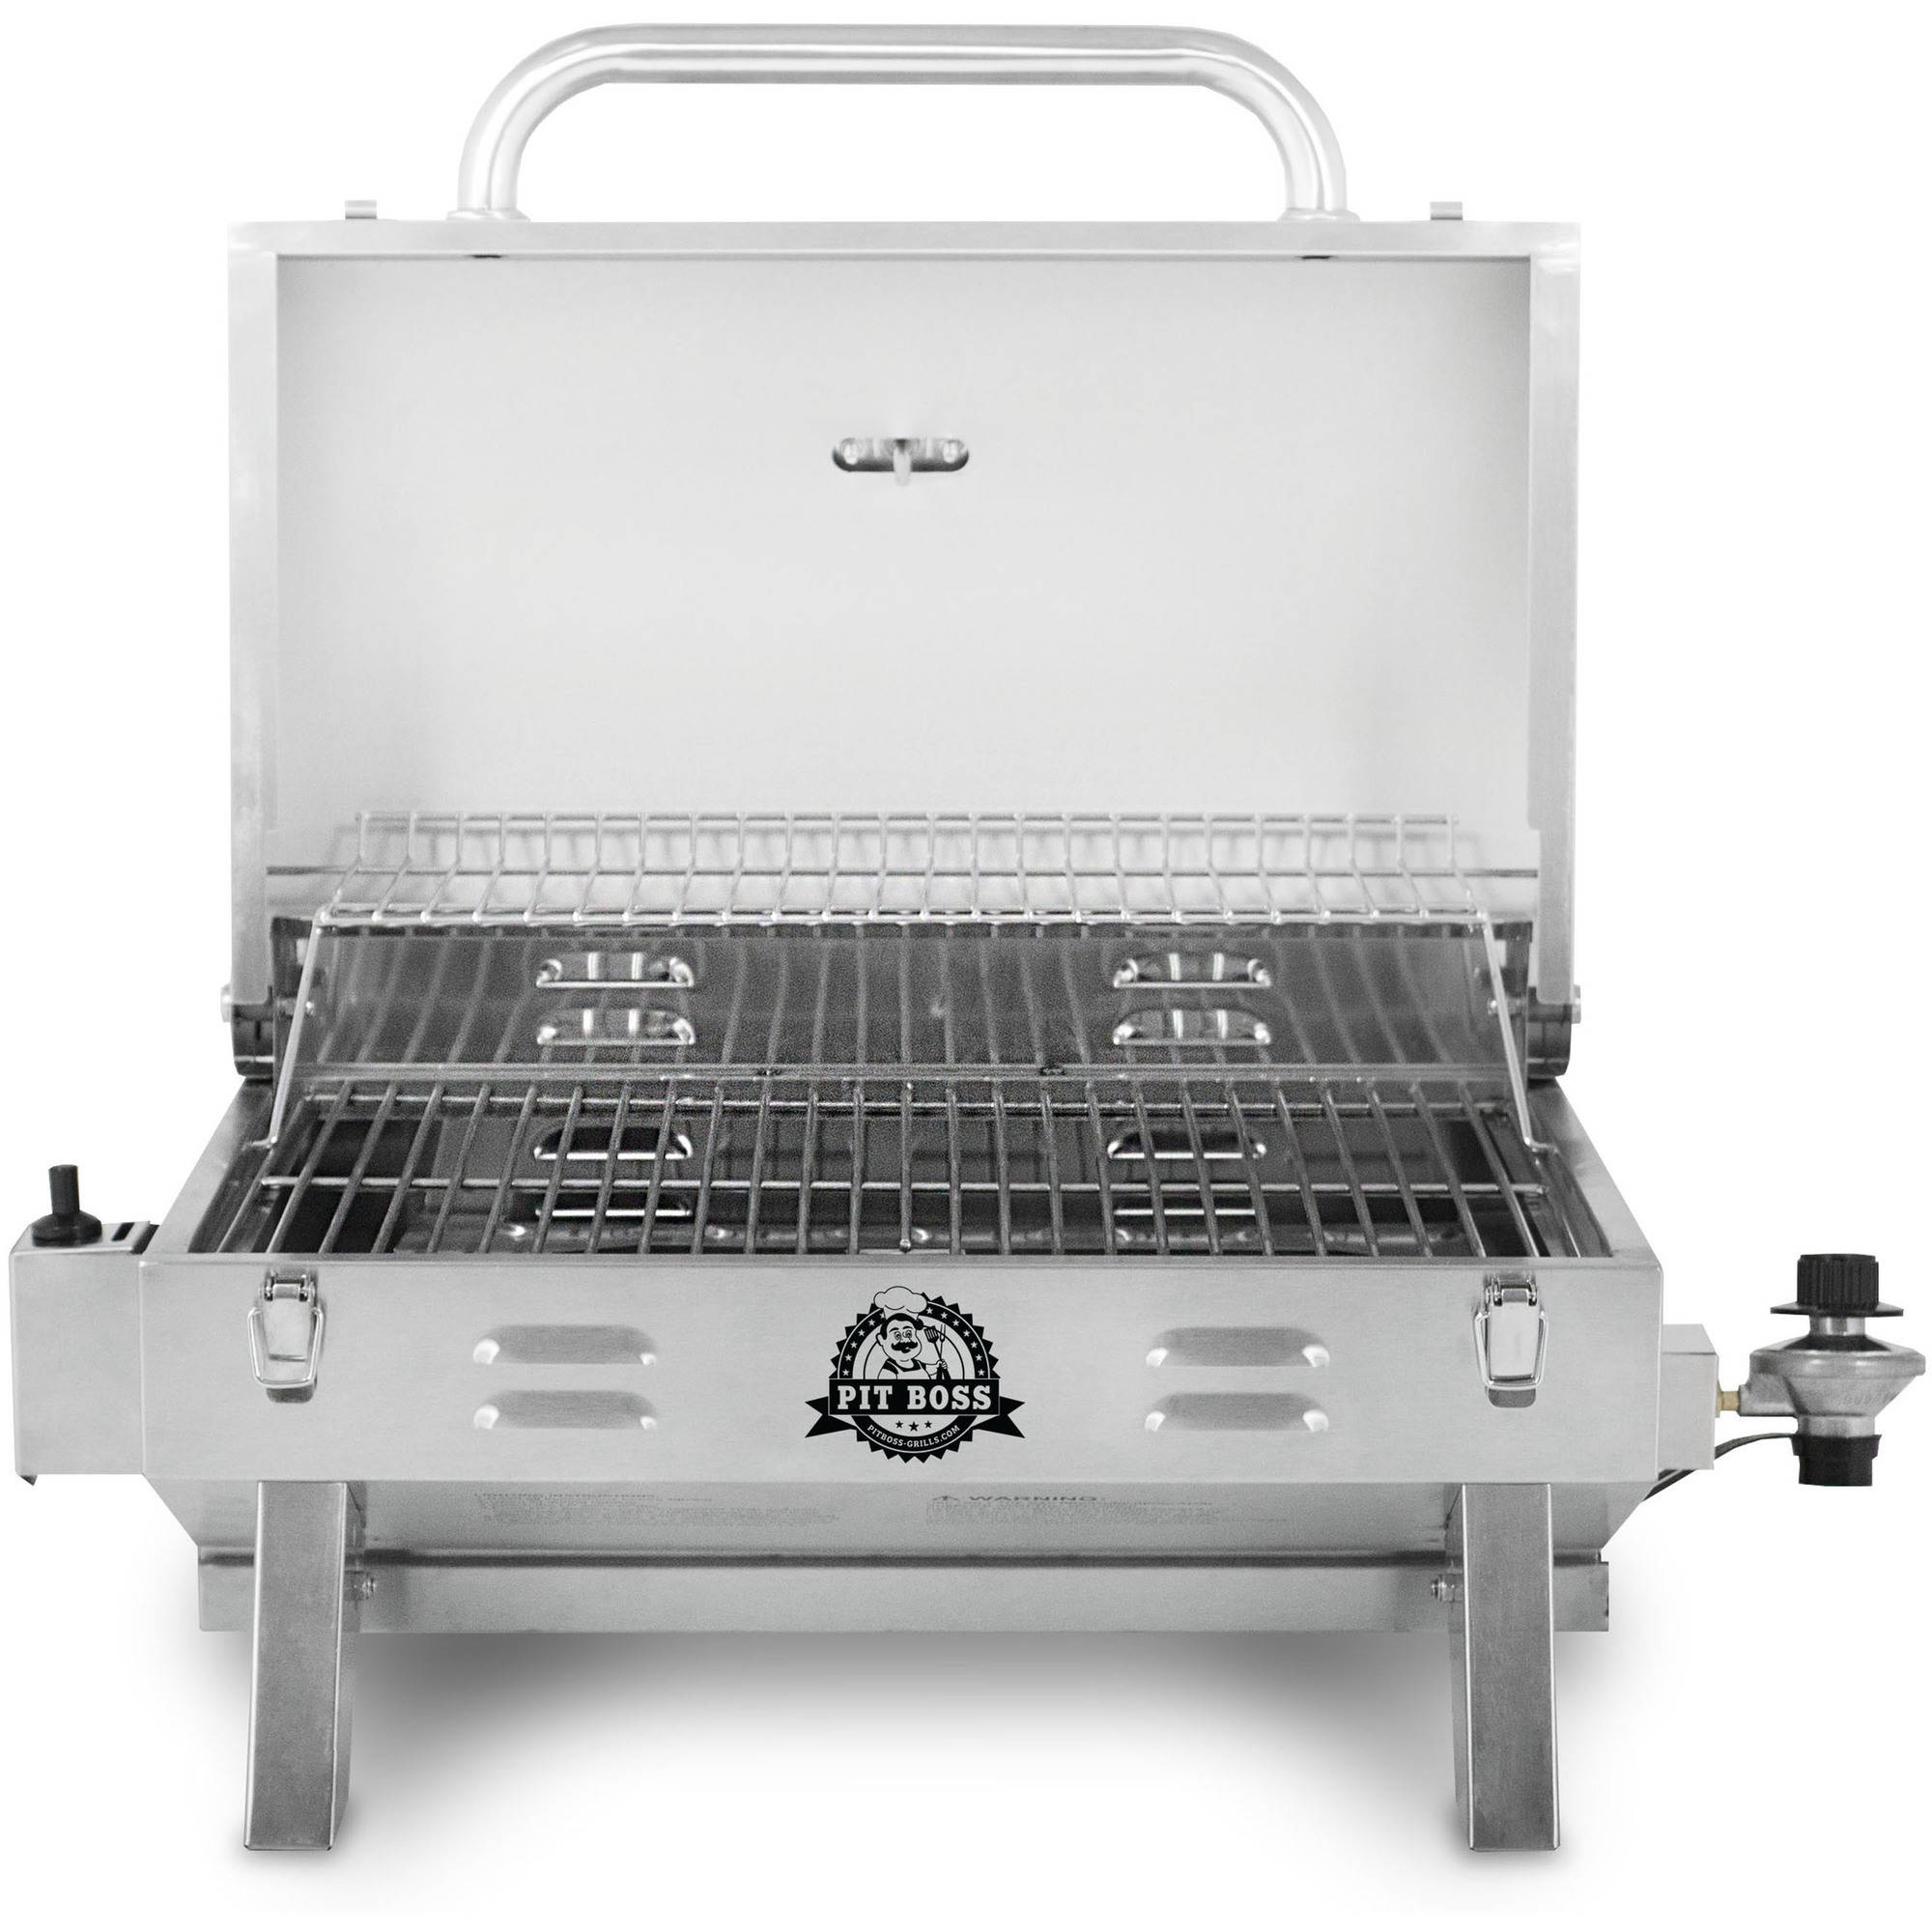 Pit Boss 305 sq in Stainless Steel Portable Grill - image 2 of 10